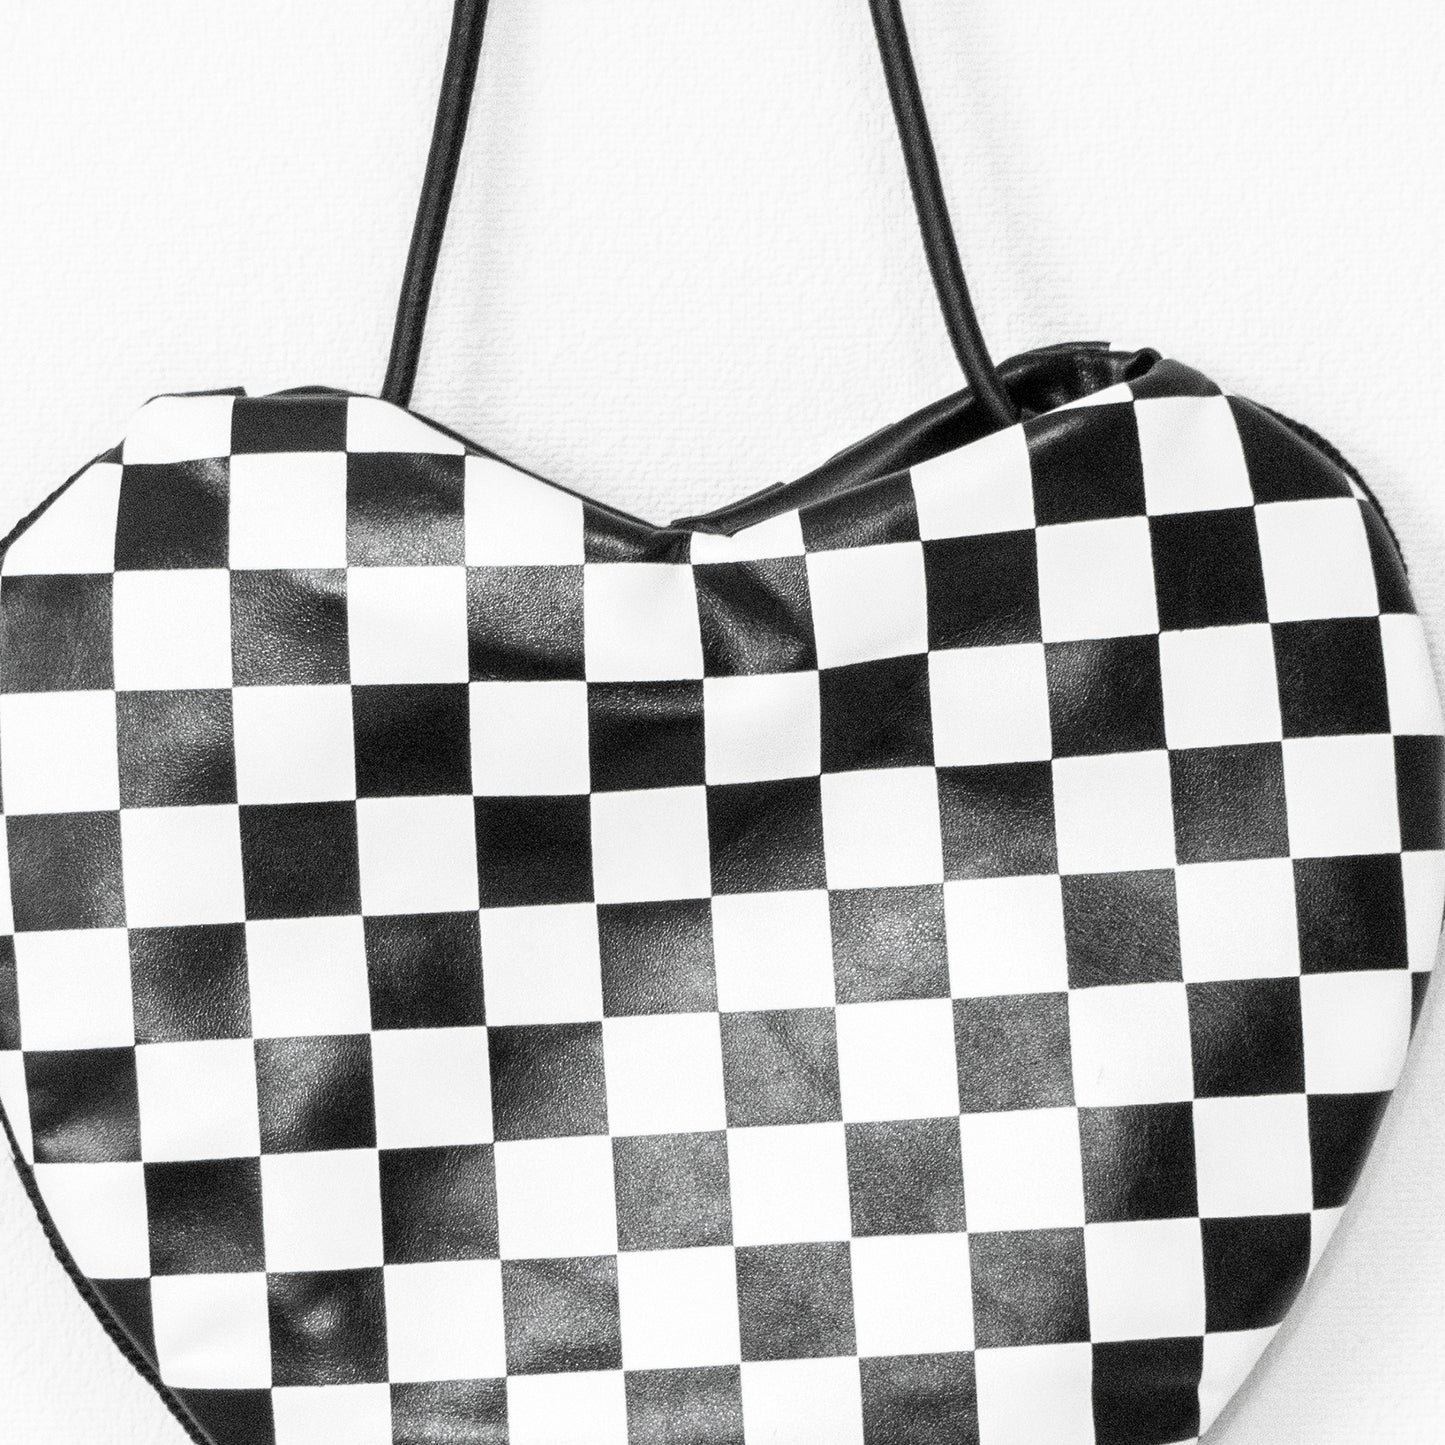 Heart Shaped Flat Bag (3 color) - YOUAREMYPOISON